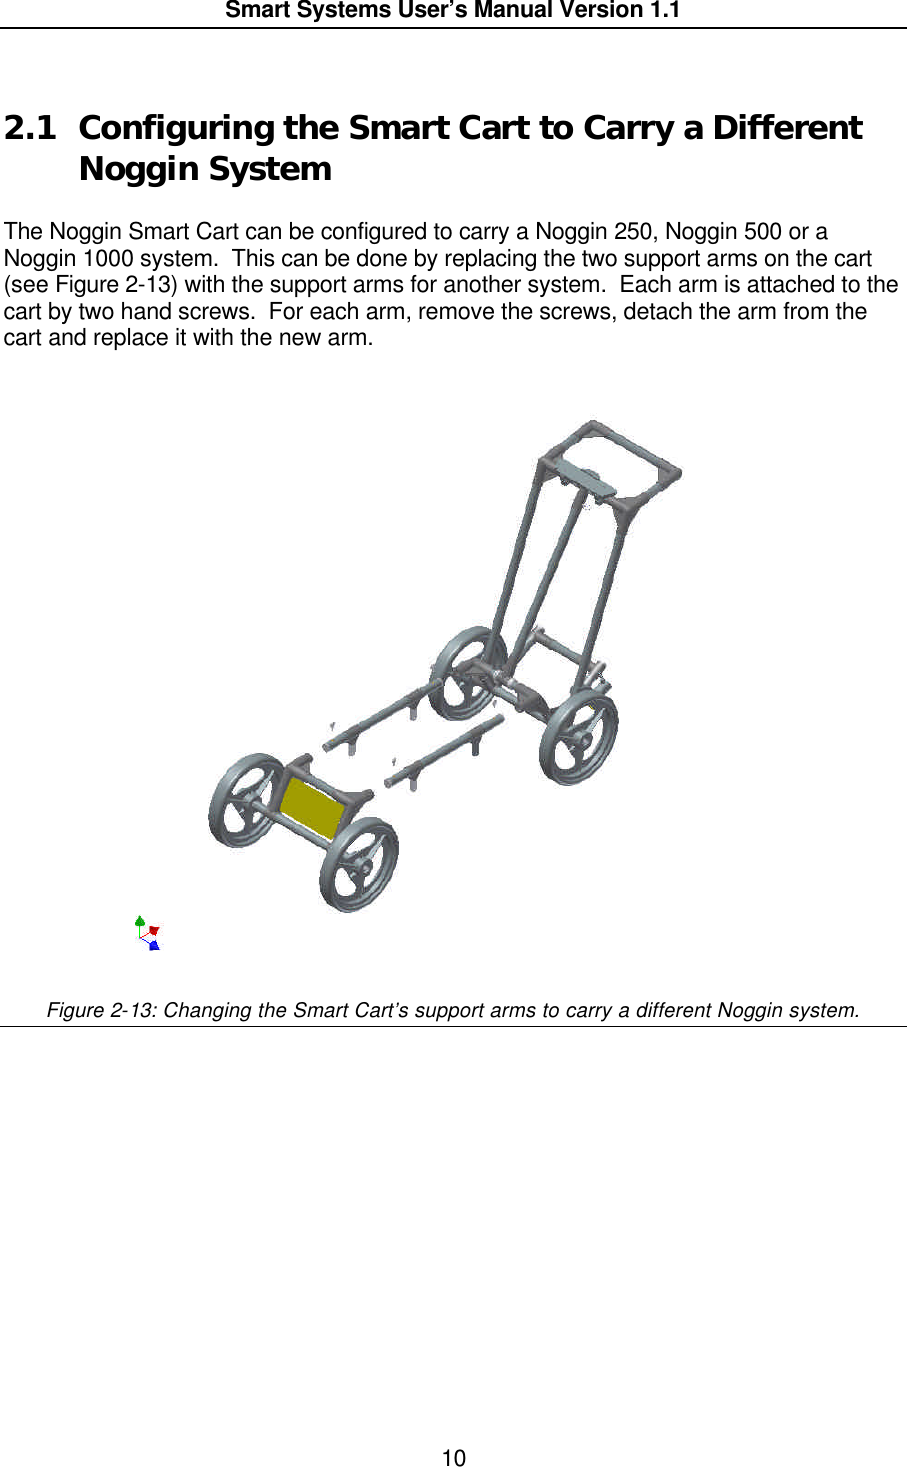  Smart Systems User’s Manual Version 1.1  10   2.1 Configuring the Smart Cart to Carry a Different Noggin System  The Noggin Smart Cart can be configured to carry a Noggin 250, Noggin 500 or a Noggin 1000 system.  This can be done by replacing the two support arms on the cart (see Figure 2-13) with the support arms for another system.  Each arm is attached to the cart by two hand screws.  For each arm, remove the screws, detach the arm from the cart and replace it with the new arm.    Figure 2-13: Changing the Smart Cart’s support arms to carry a different Noggin system. 